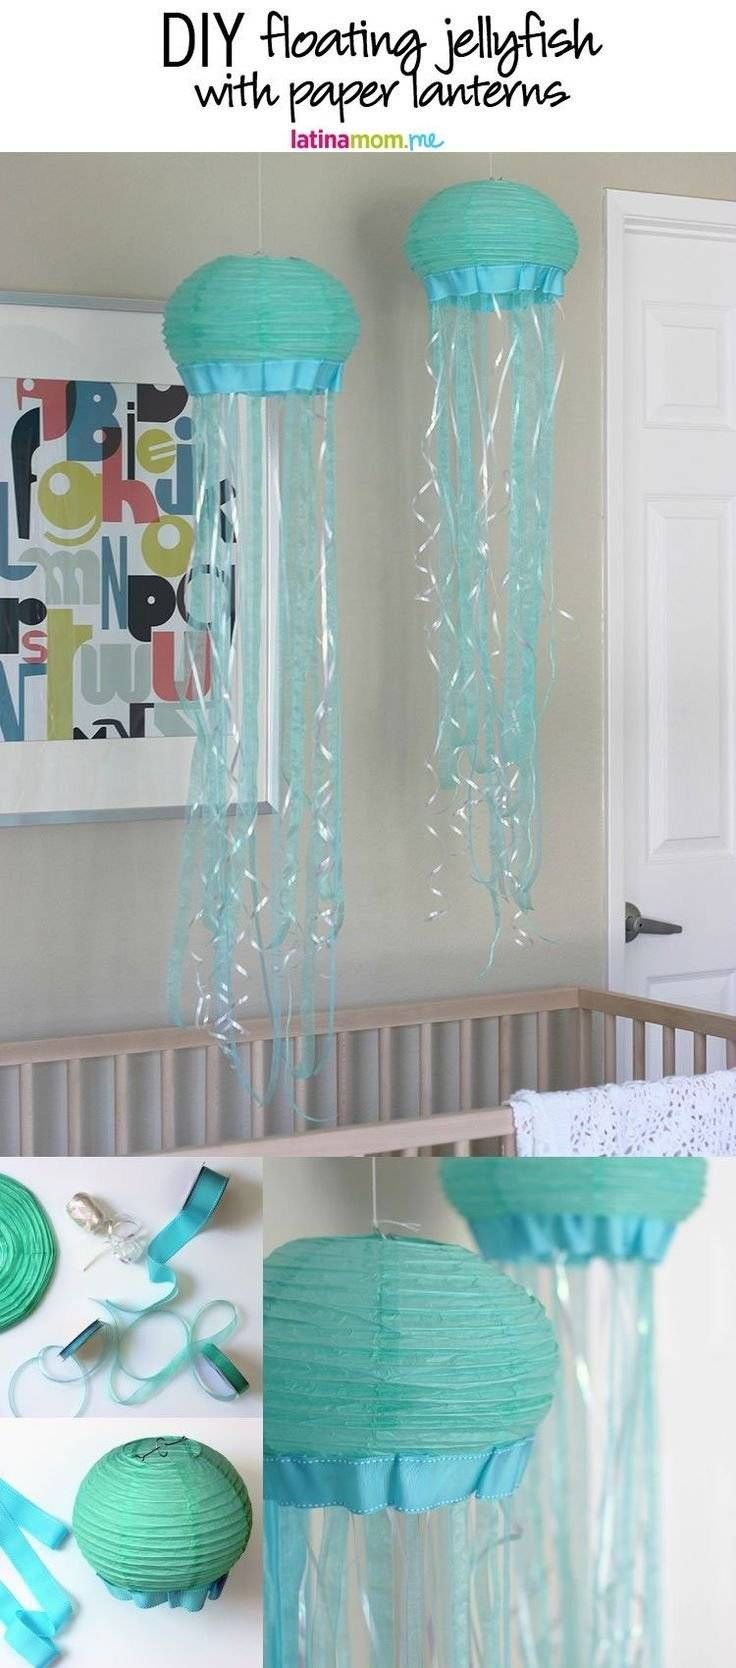 Paper Lanterns For Room Decor Decorating With Party Ideas Hanging Within Jellyfish Inspired Pendant Lights (View 5 of 15)